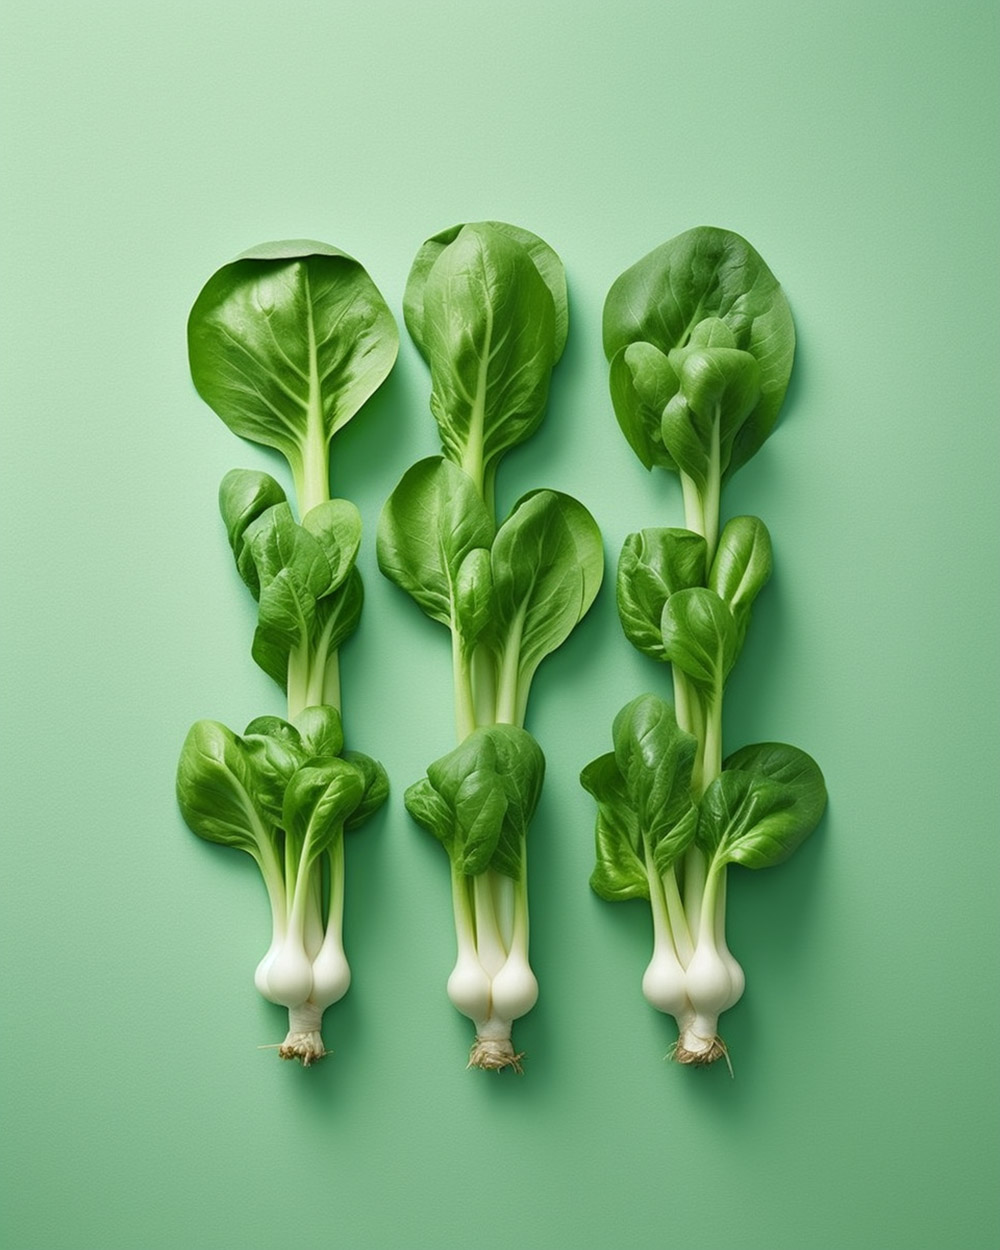 bok choy as substitute